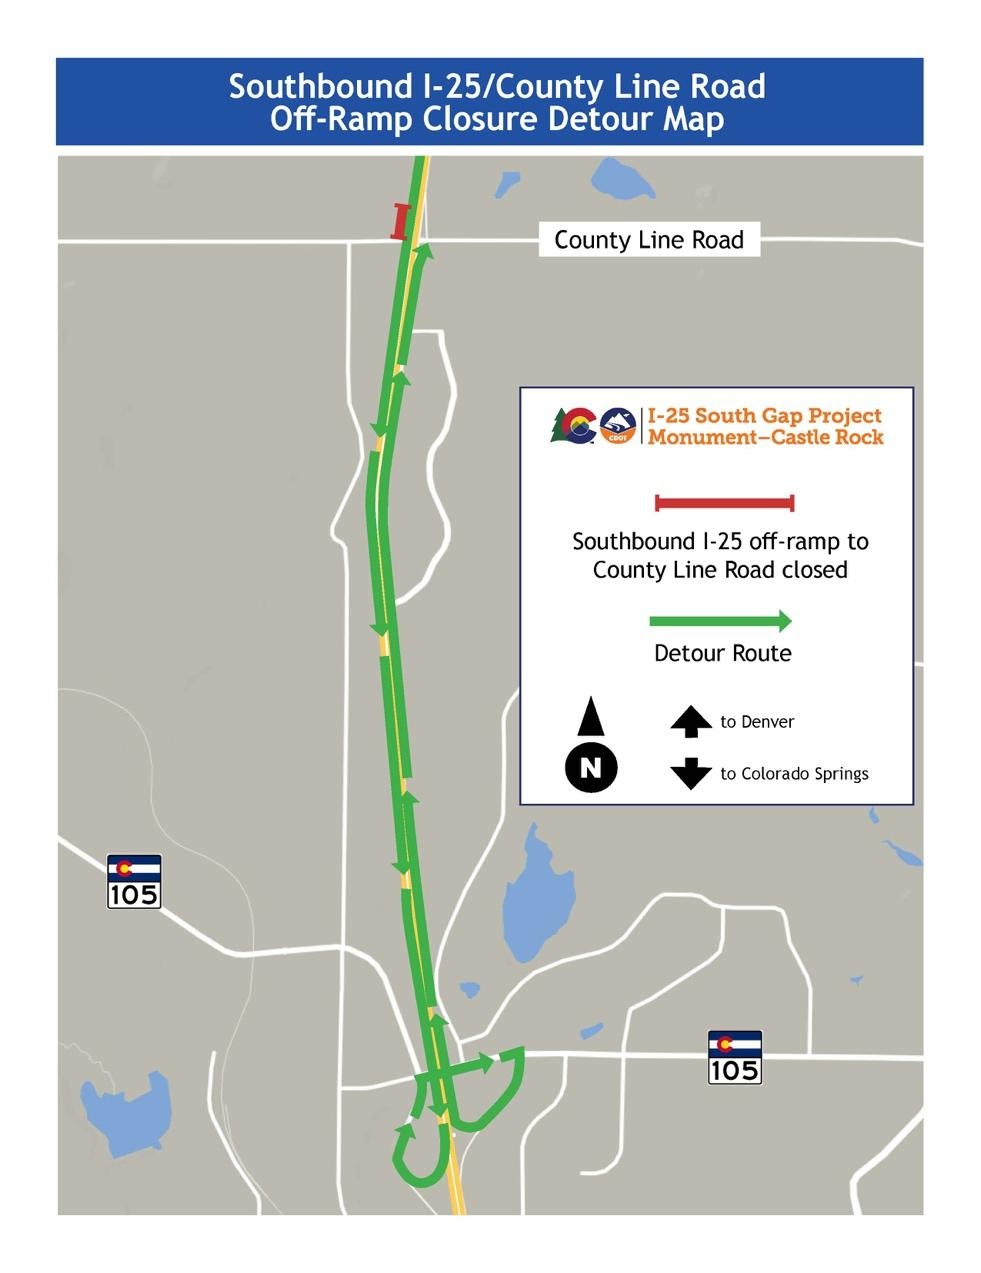 Southbound I-25/County Line Road Off-Ramp Closure Detour Route detail image